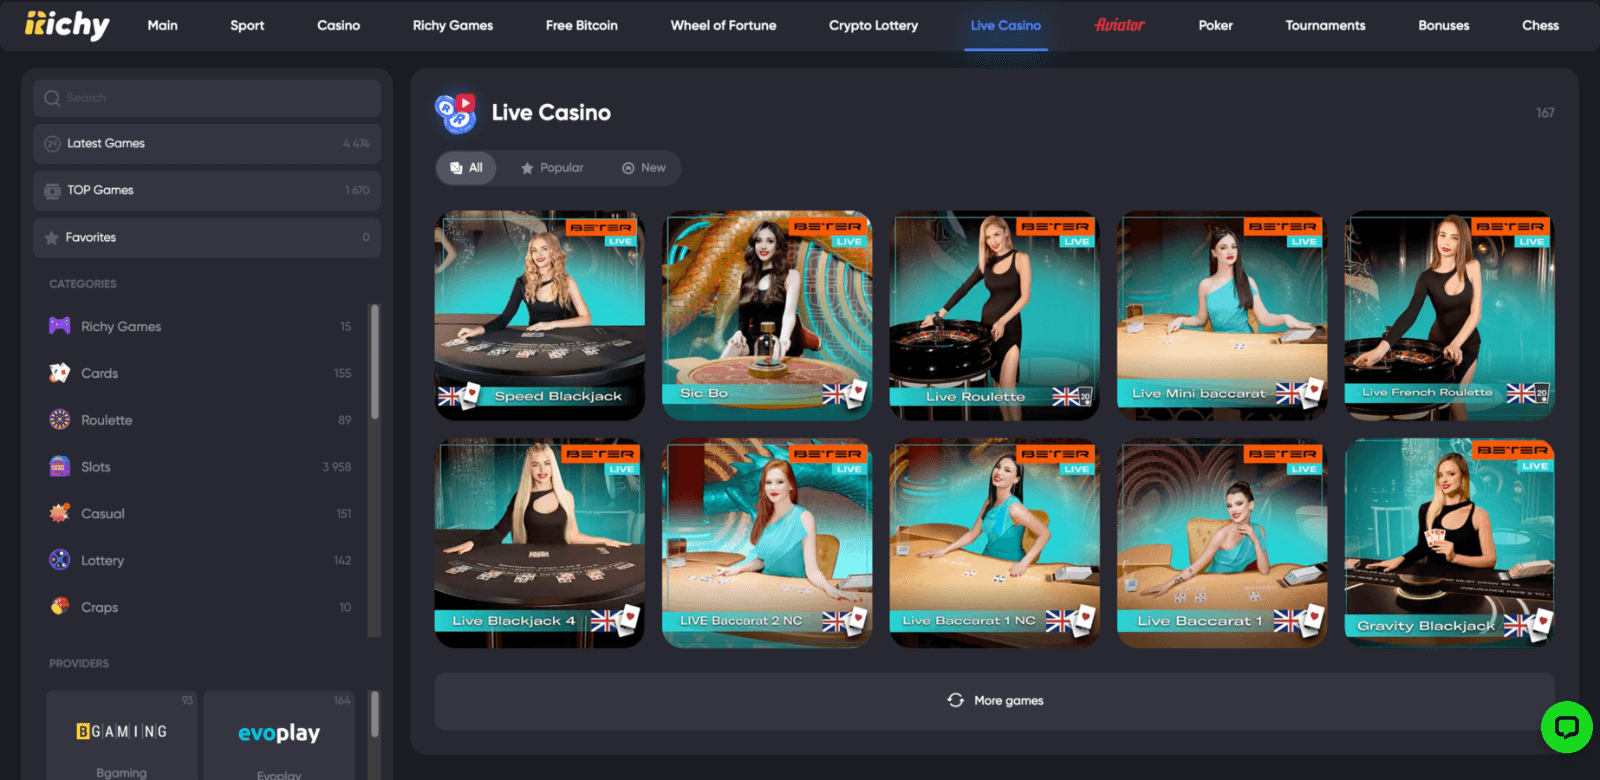 In the Live Casino section of the Richy Casino website you can play a variety of games with live dealers